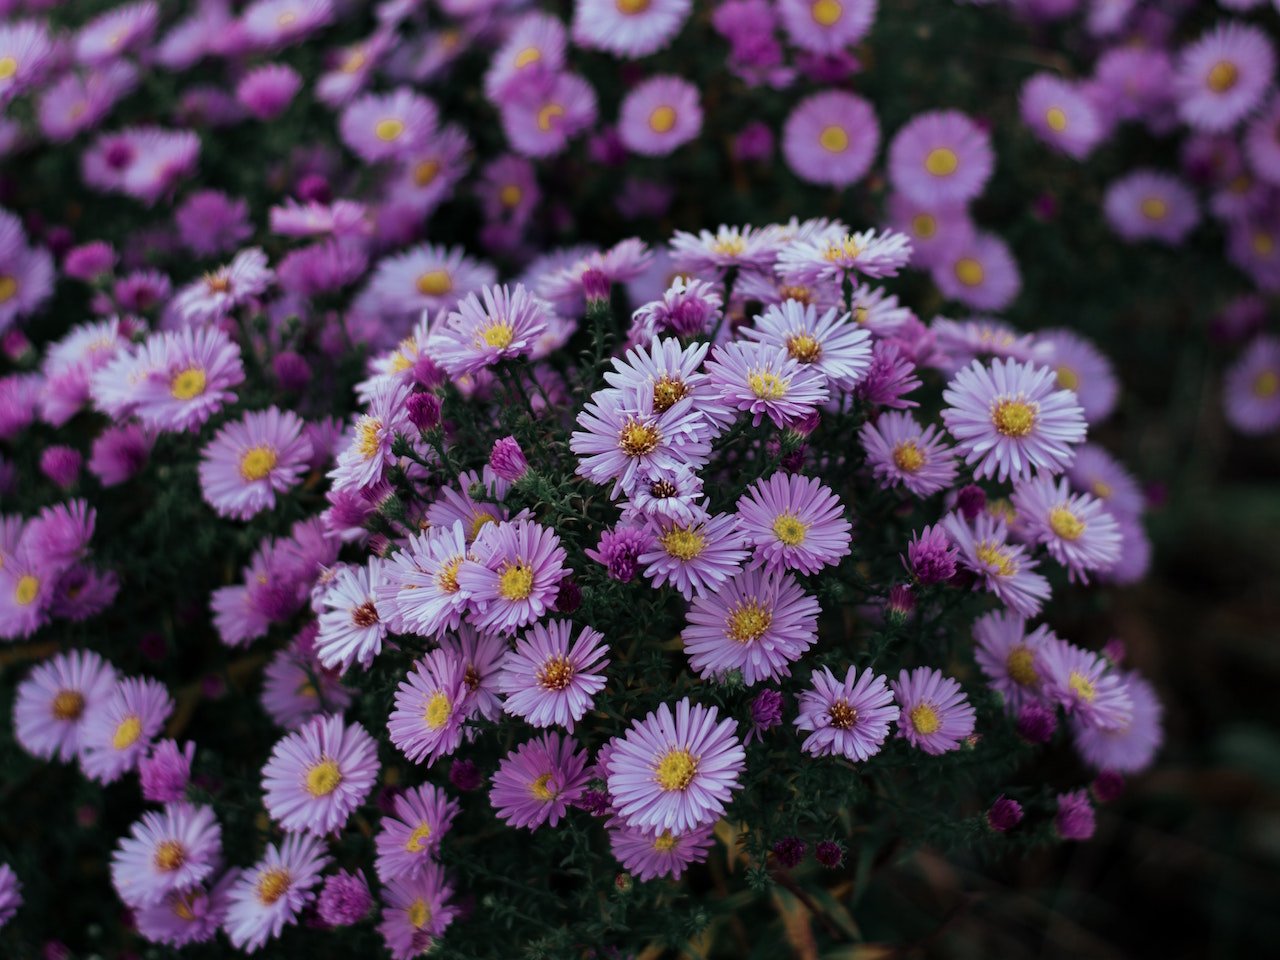 light purple Aster flowers all bunched close together in a garden